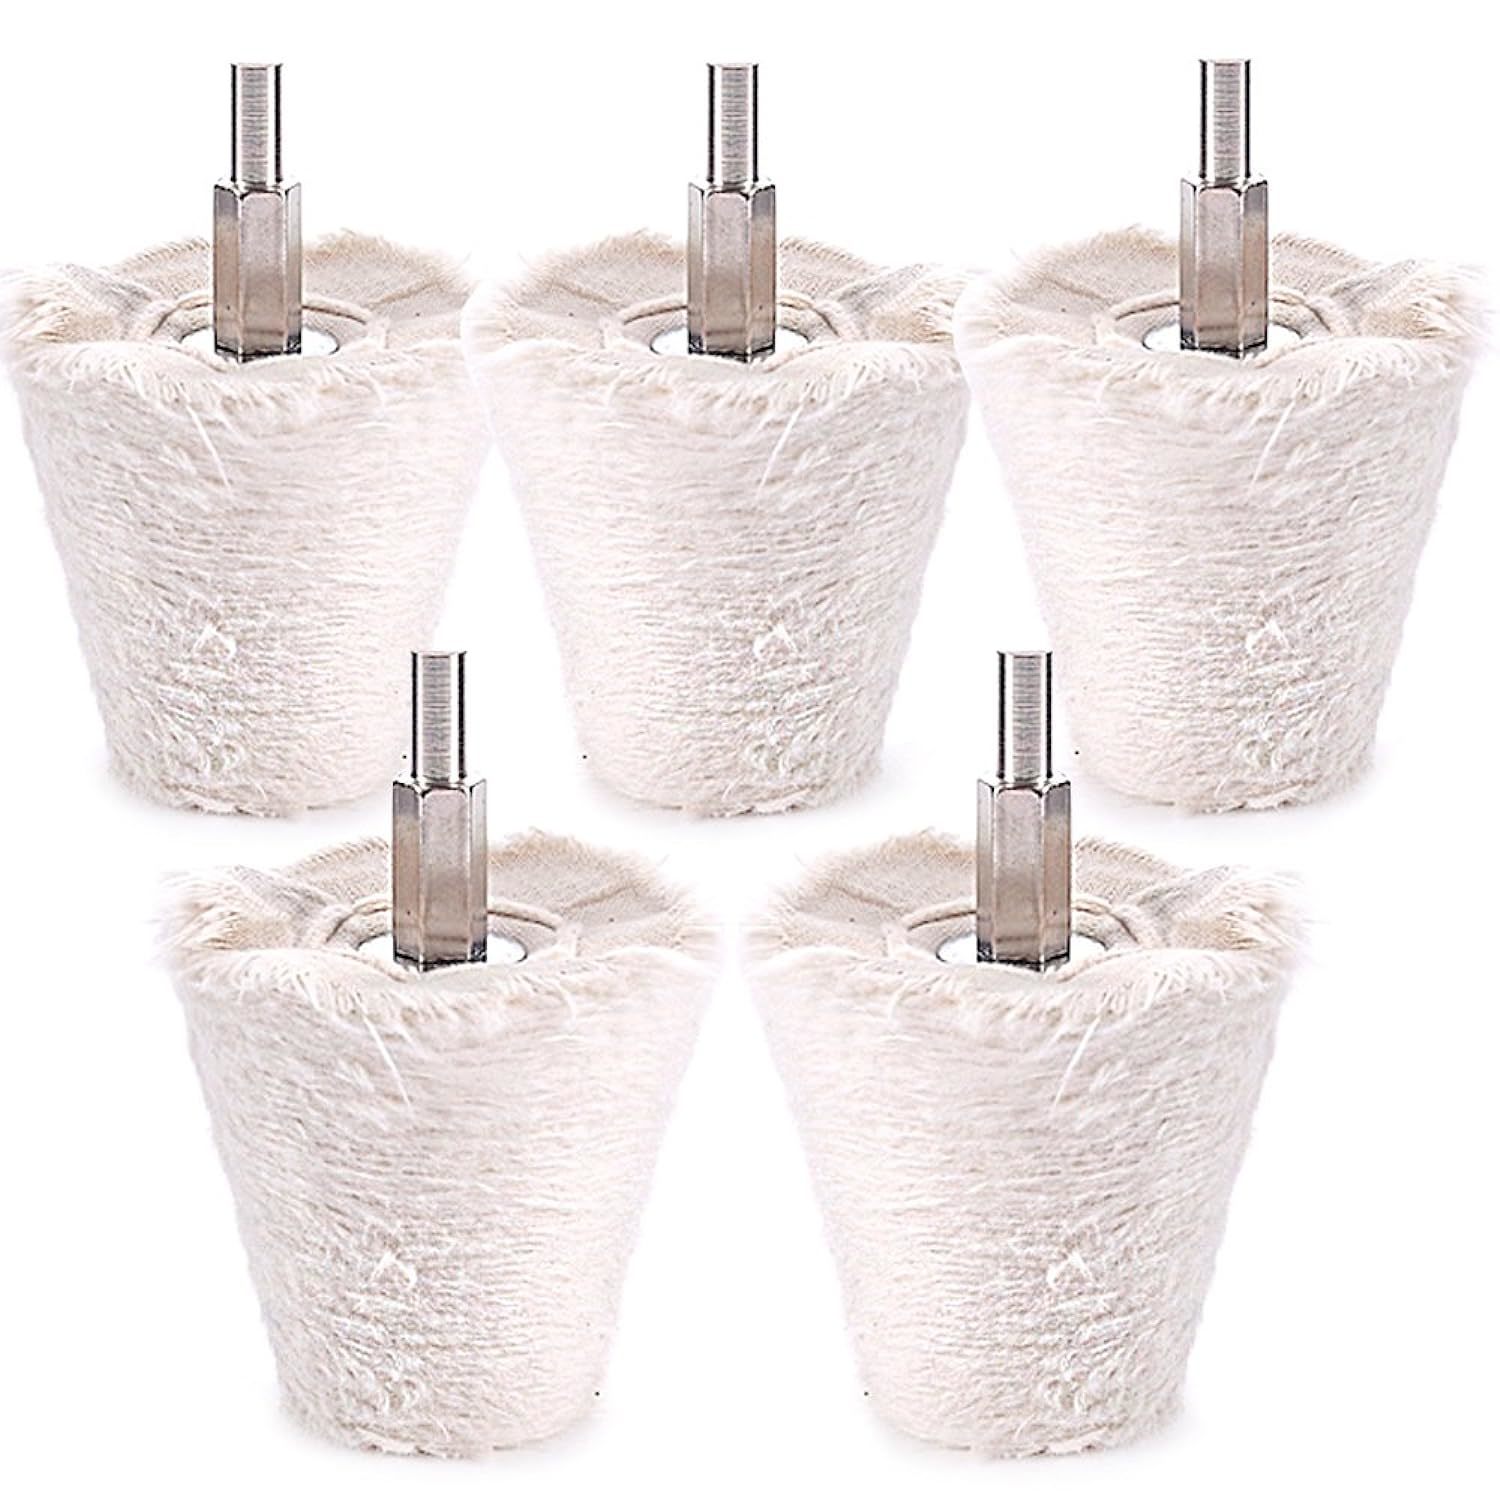 Primary image for 5 Pcs Cone-Shaped White Flannelette Polishing Wheel Grinding Head With 1/4"Handl